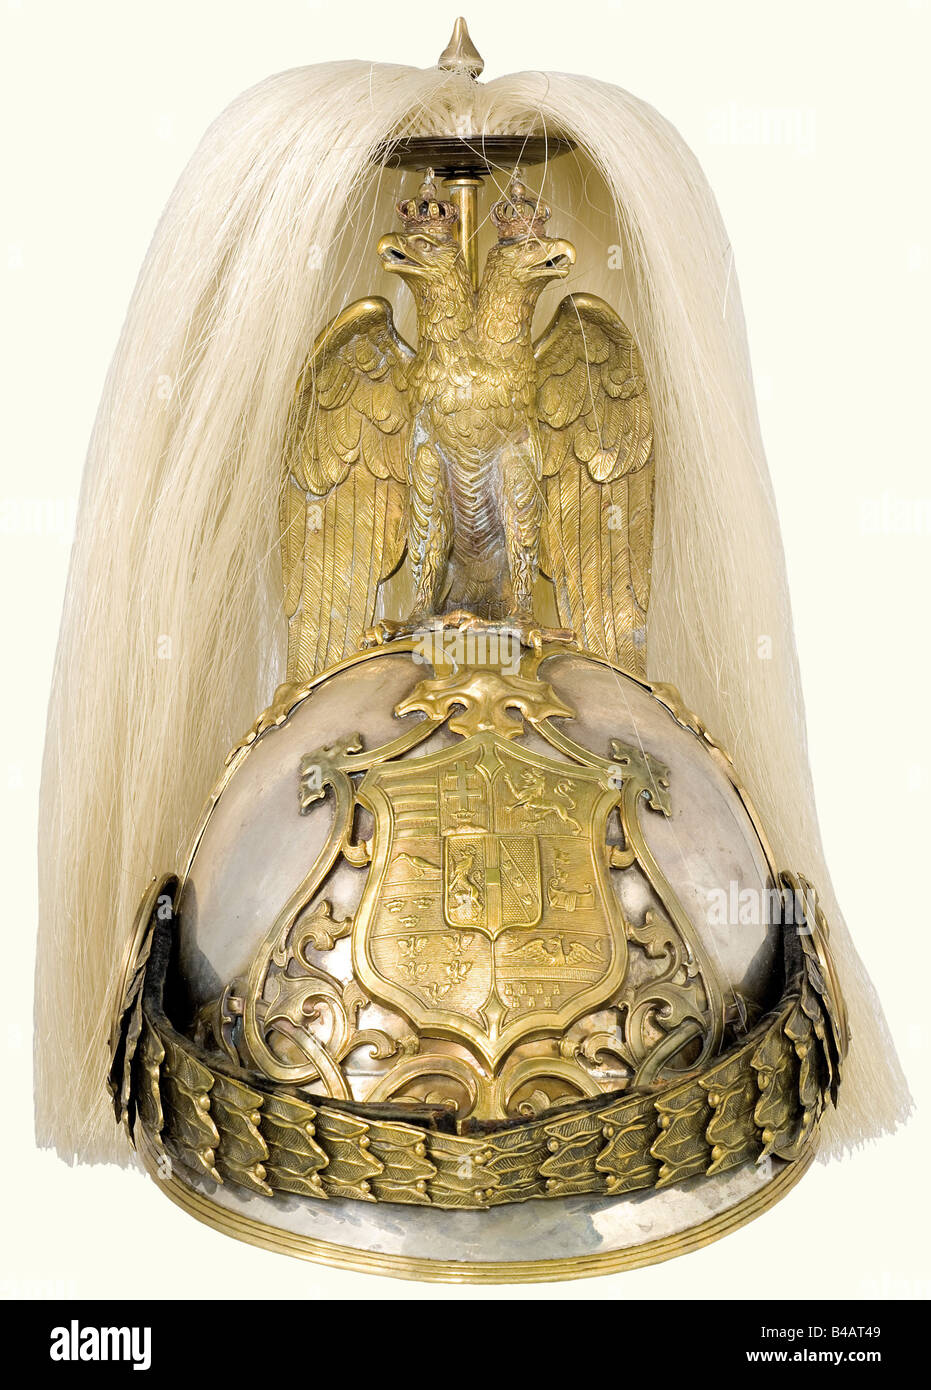 A helmet for the k.u.k First Arcieren Life Guards, according to the 1905 regular for equipment and uniforms of the First Arcieren Life Guards. Silver skull, with incomplete Diana head's silver hallmark (800), the master's mark 'HS' on the nape. Armoury stamps 'N31' and '37D'. The bronze, crowned double eagle and the beautifully worked mountings are fire-gilded with abrasions in places. The metal chinscales are backed with black velvet. Black coloured silk lining, artificial leather sweatband. White horse hair plume to be mounted behind the neck of the double ea, Stock Photo